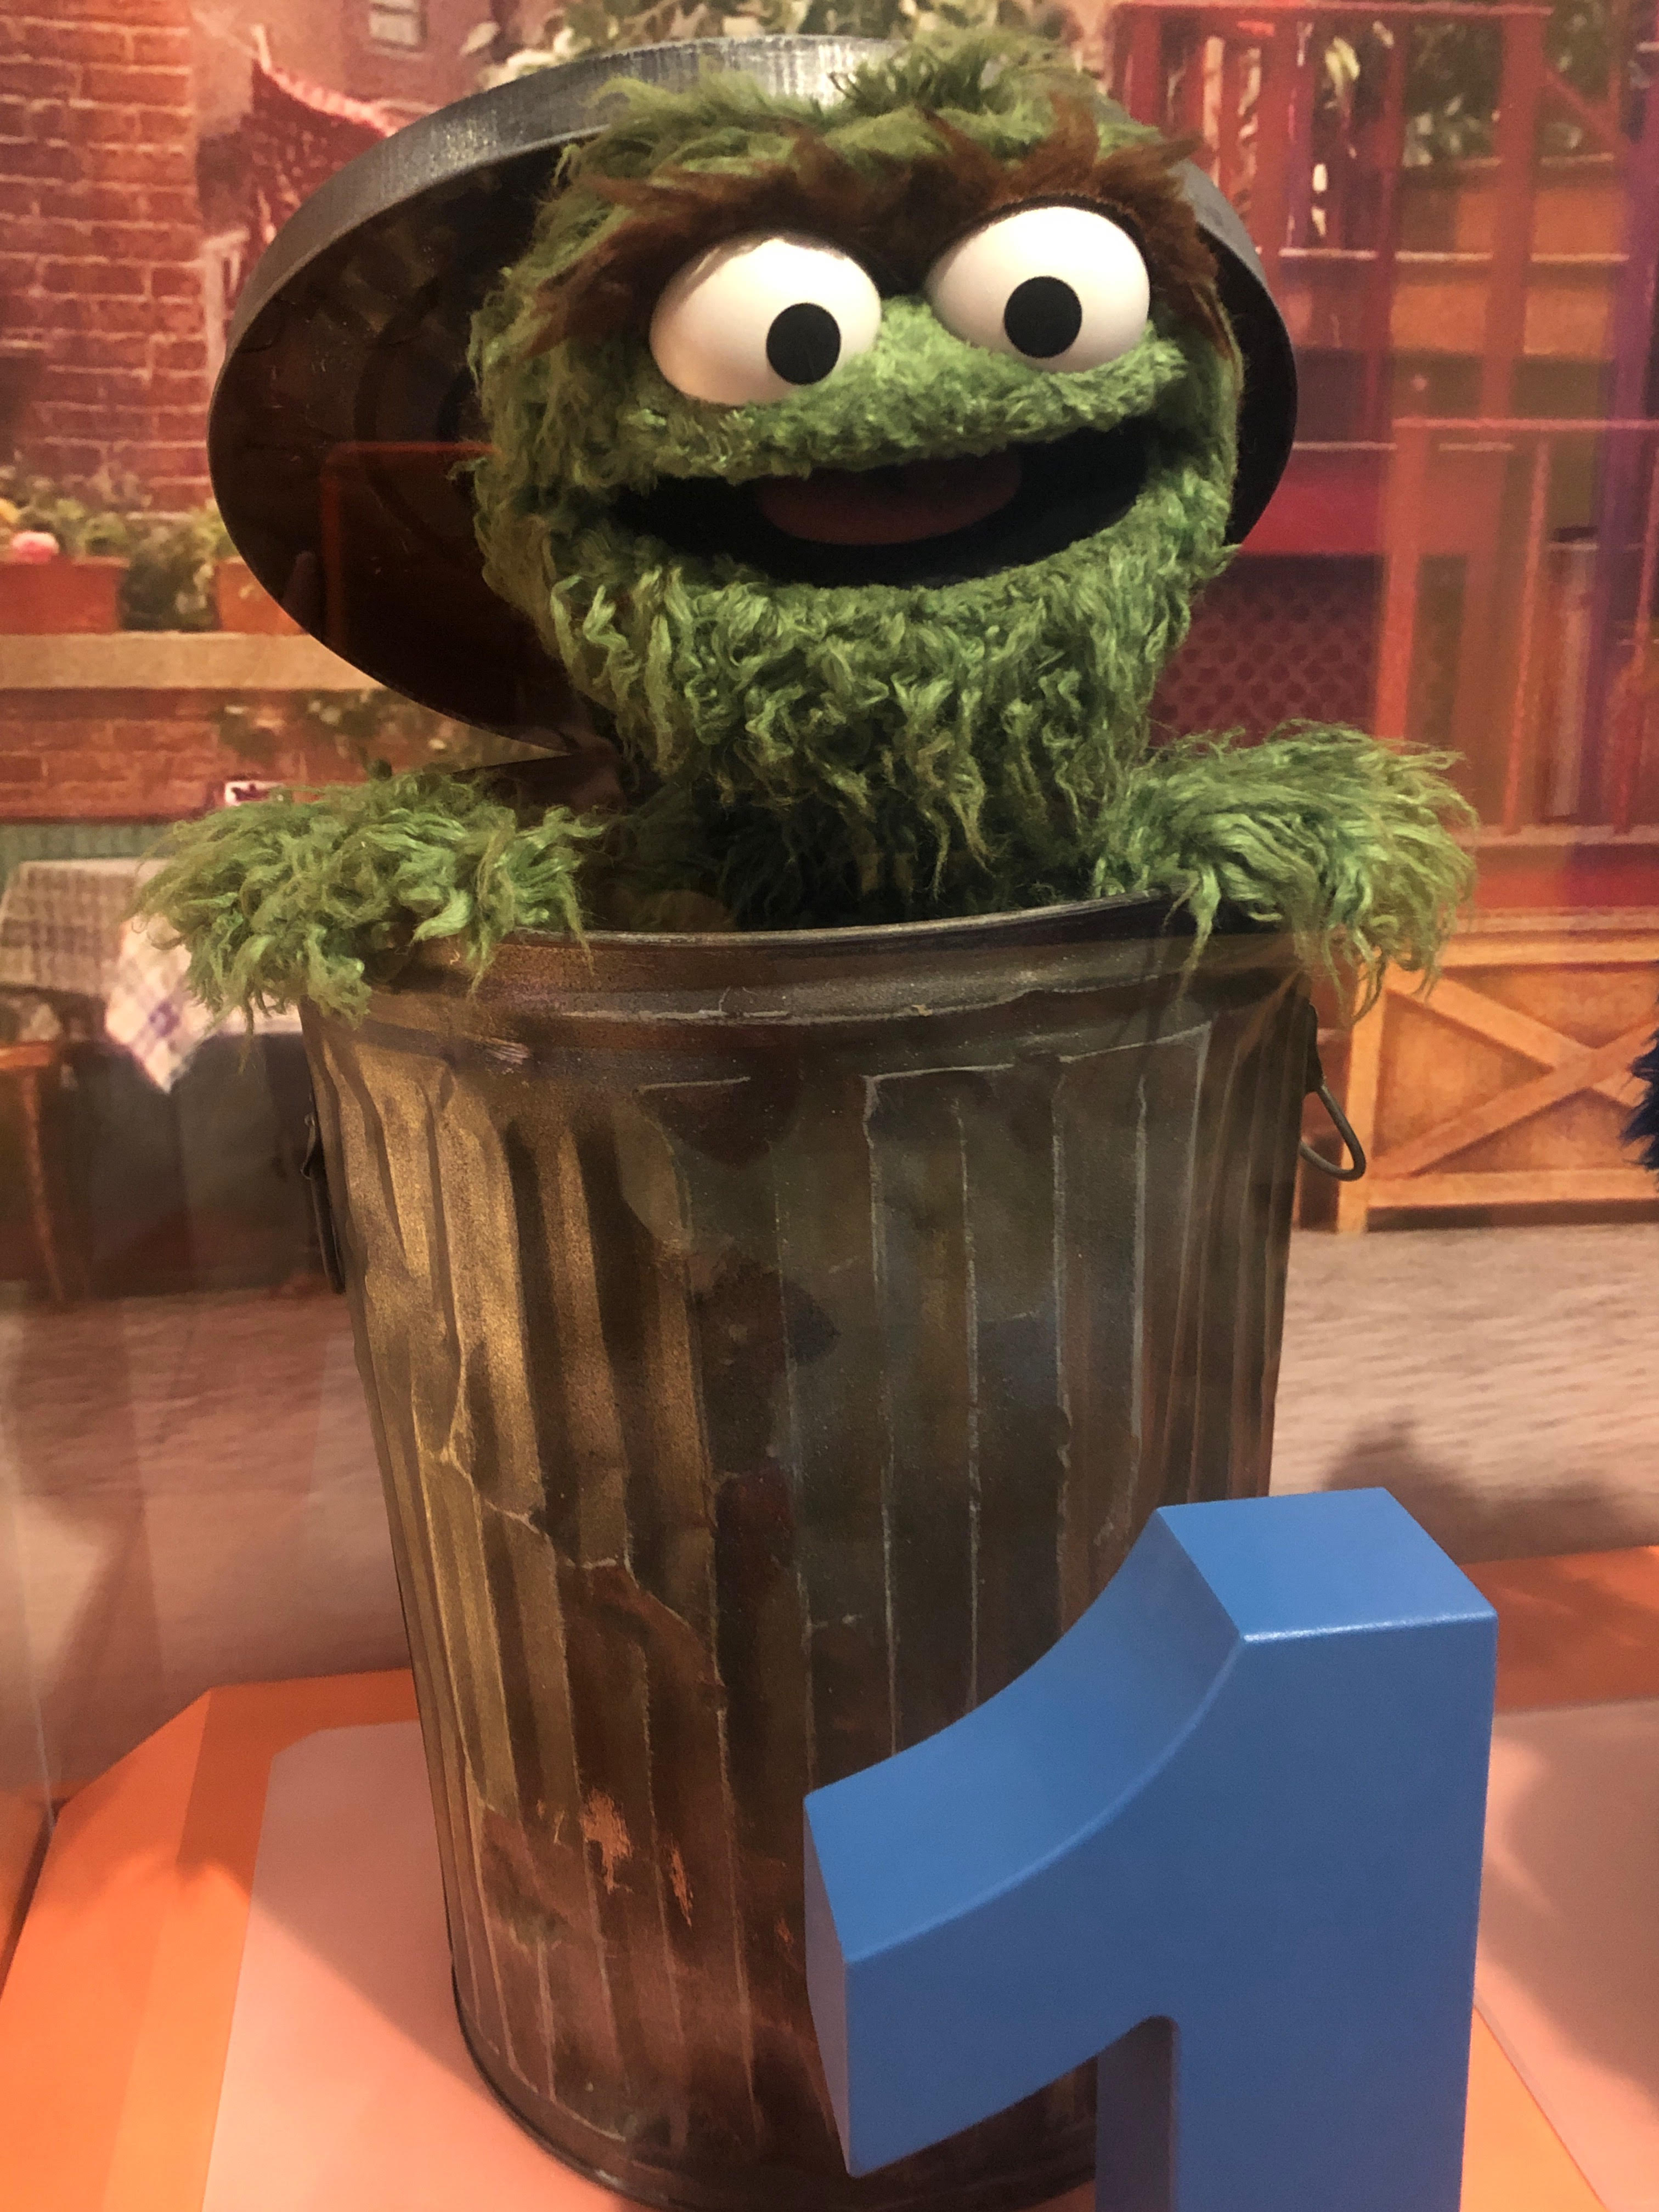 Oscar the Grouch display at the Worlds of Puppetry Museum